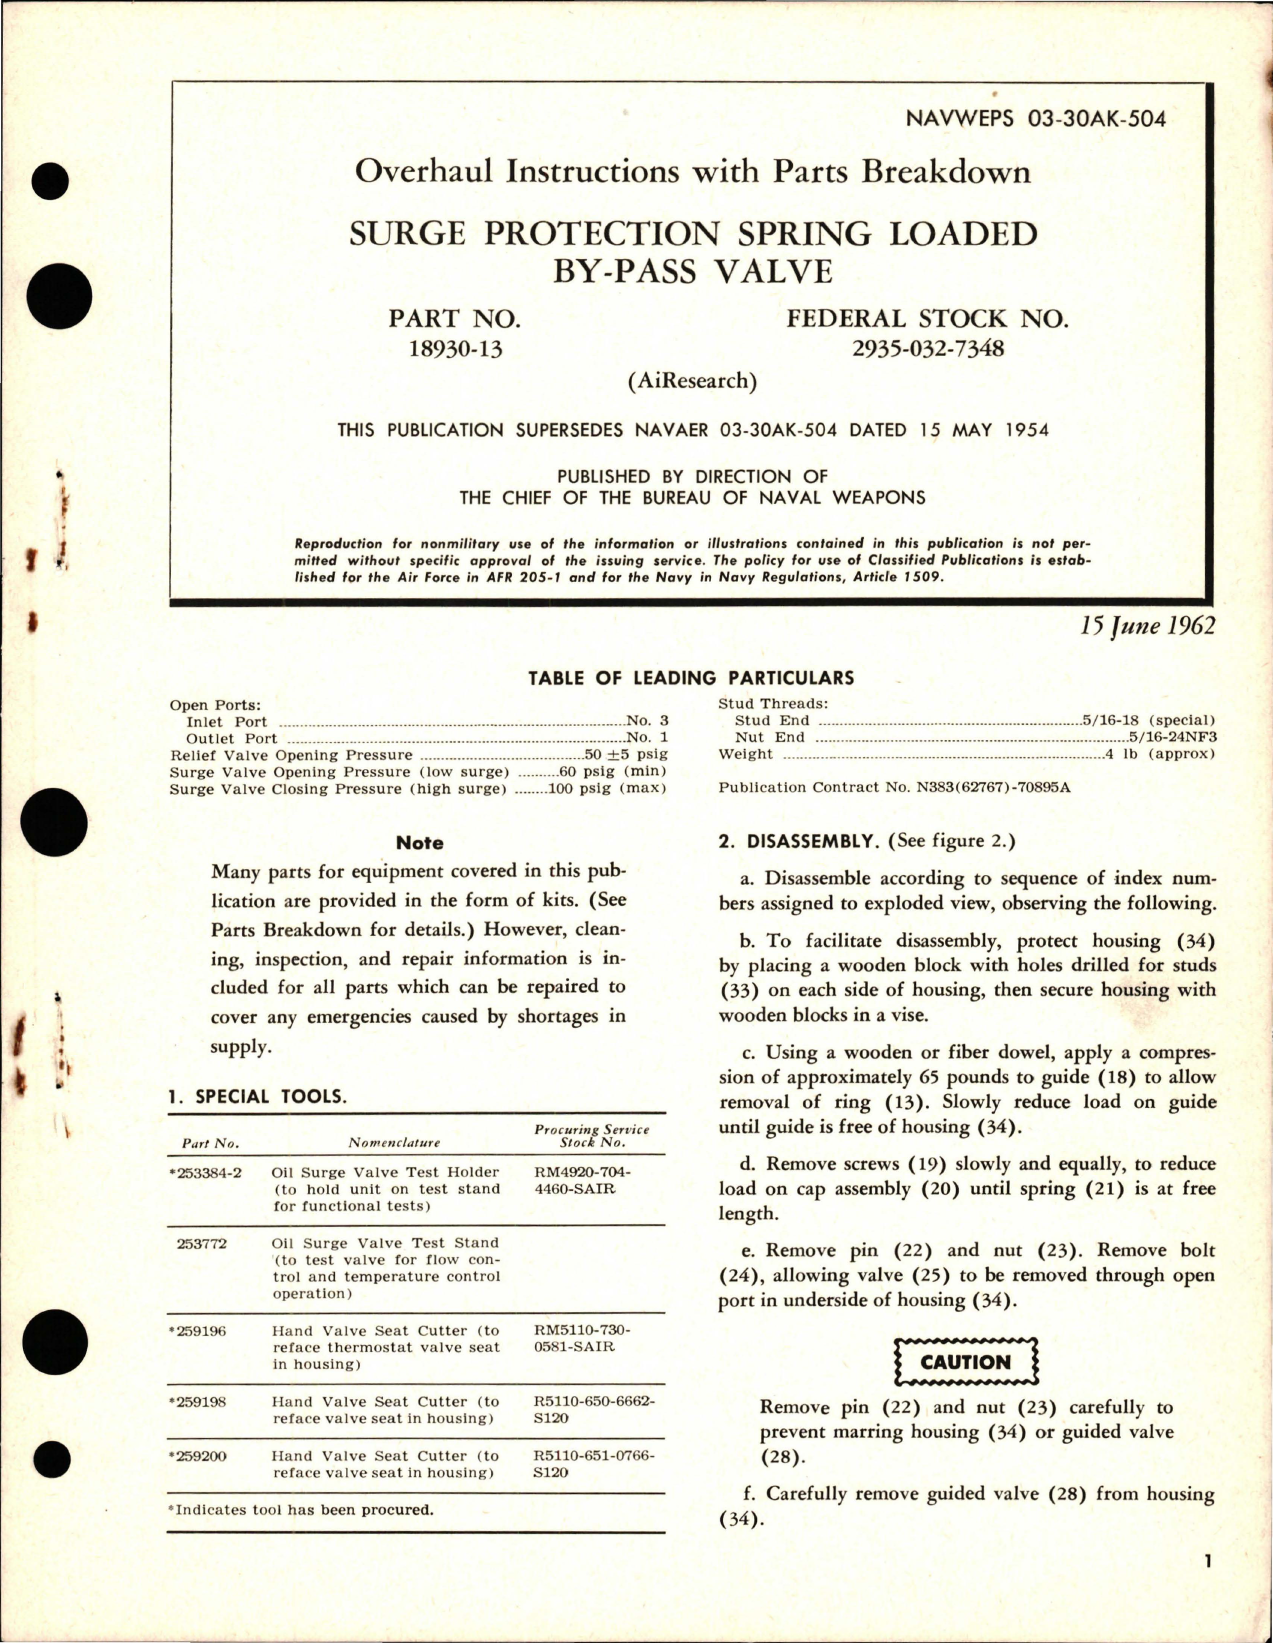 Sample page 1 from AirCorps Library document: Overhaul Instructions with Parts Breakdown for Surge Protection Spring Loaded By-Pass Valve - Part 18930-13